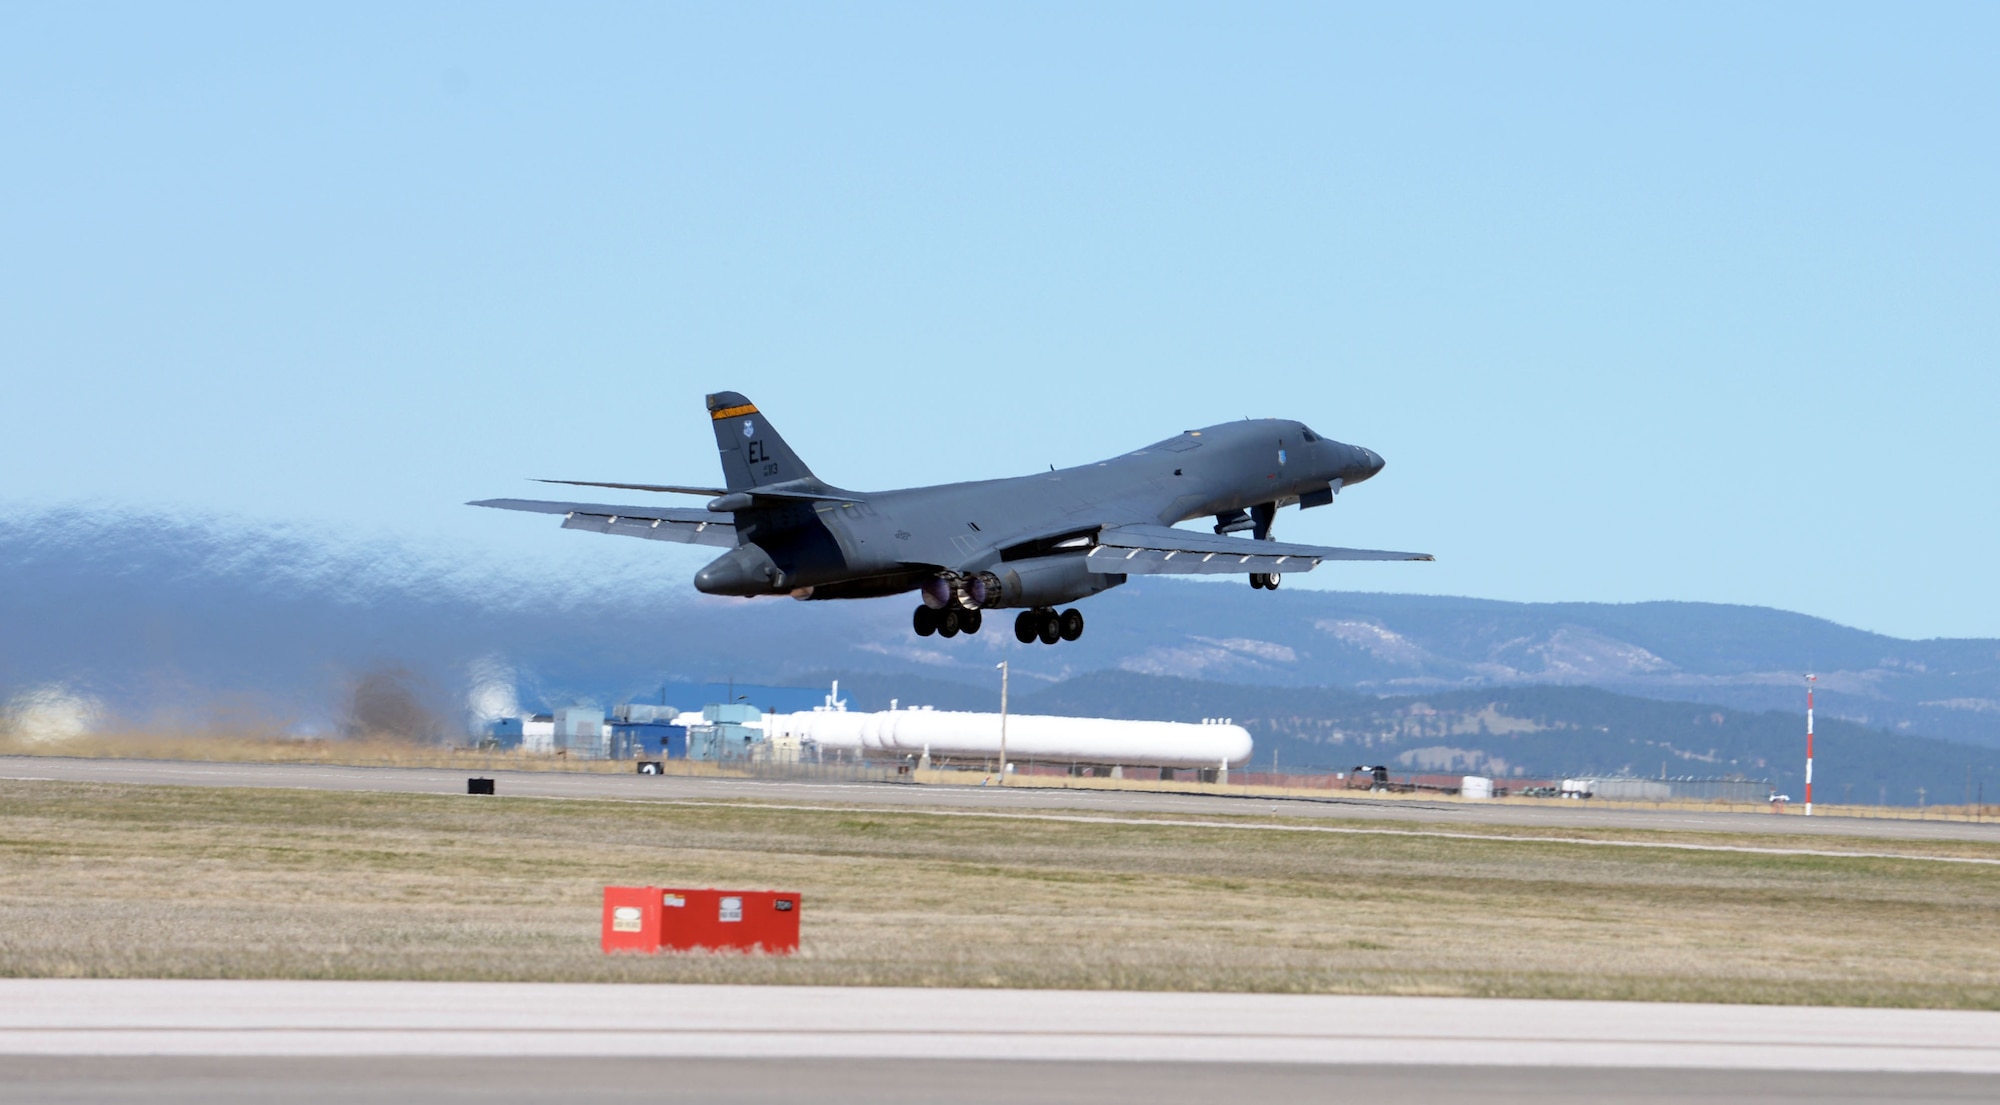 A U.S. Air Force B-1B Lancer thunders down the runway at Ellsworth Air Force Base, S.D., April 21, 2020. The B-1 bomber flew from the continental United States and integrated with the Koku Jieitai (Japan Air Self Defense Force or JASDF) to conduct bilateral and theater familiarization training near Japan. (U.S. Air Force photo by Airman Quentin K. Marx)